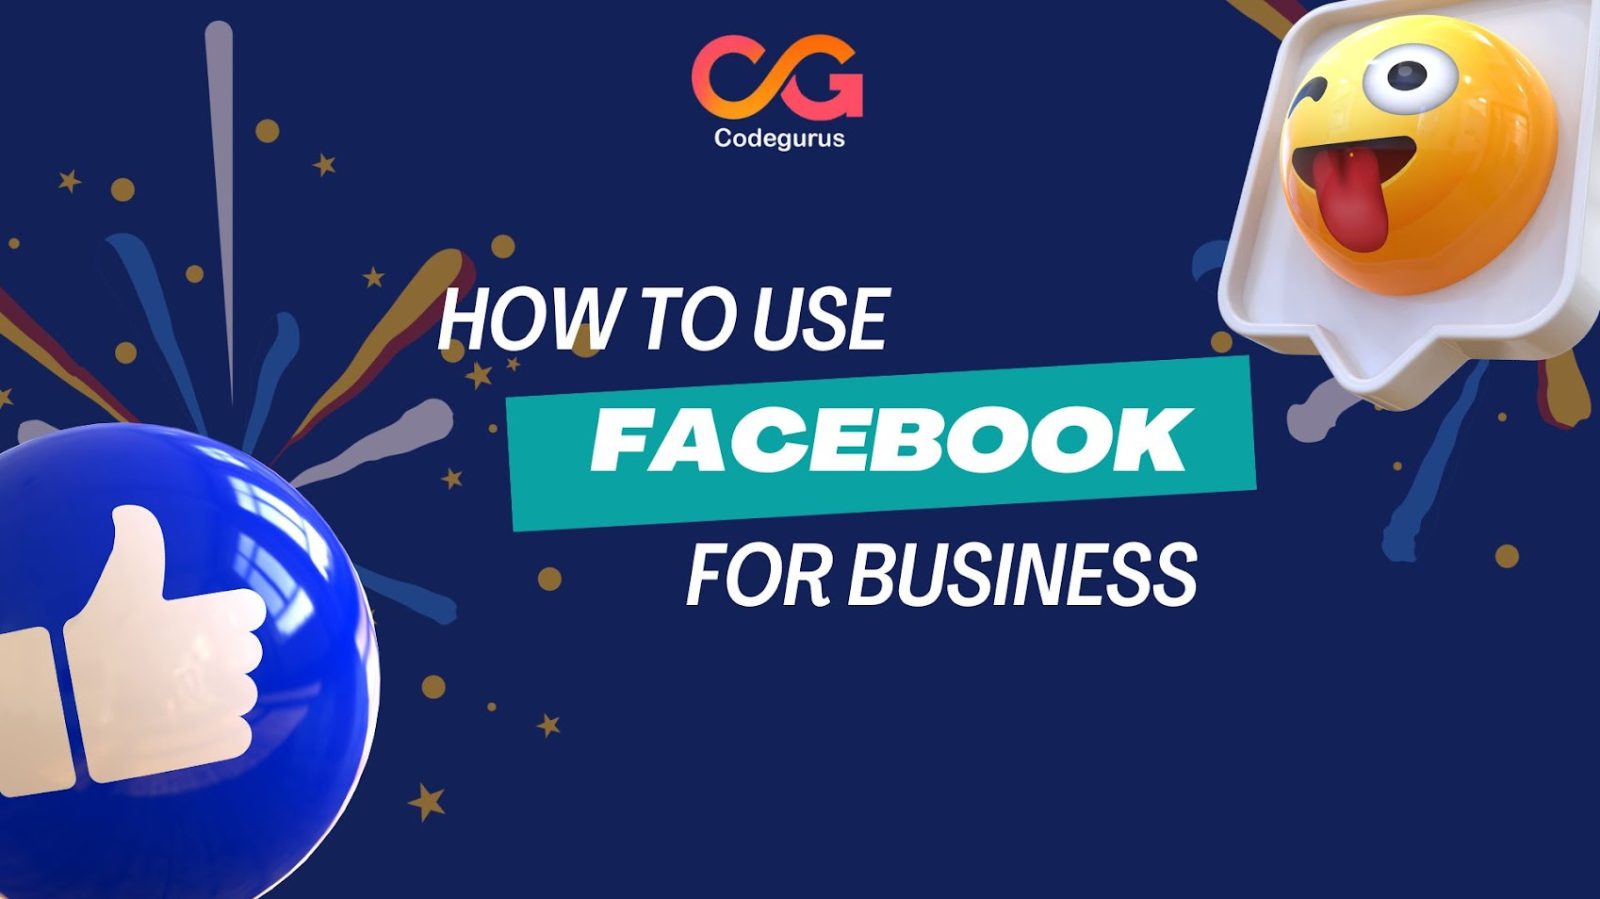 How to use Facebook for business?